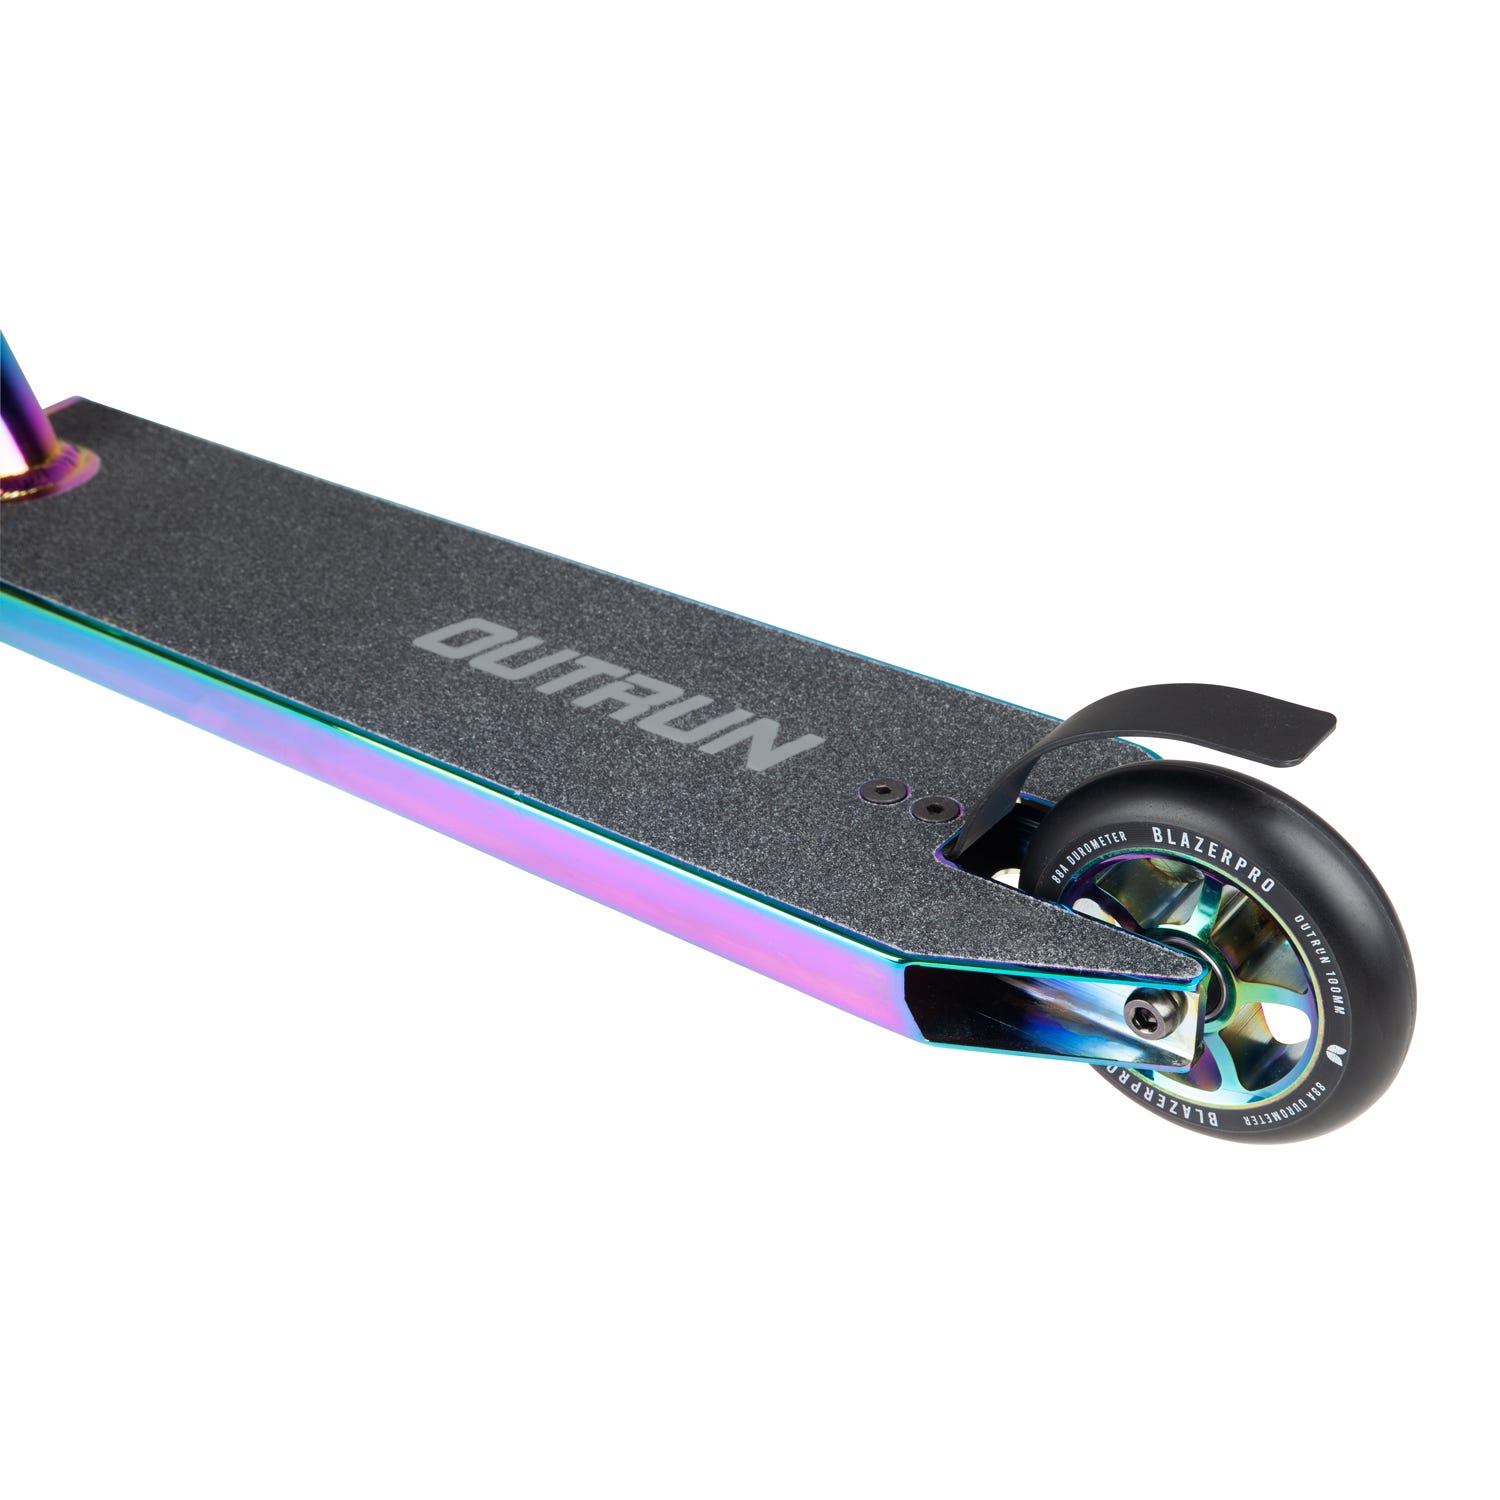 PATINETE SCOOTER FREESTYLE MINI ROOT TYPE R - Tienda Online, Skate, Surf,  Wakeboard, Maui Watersports